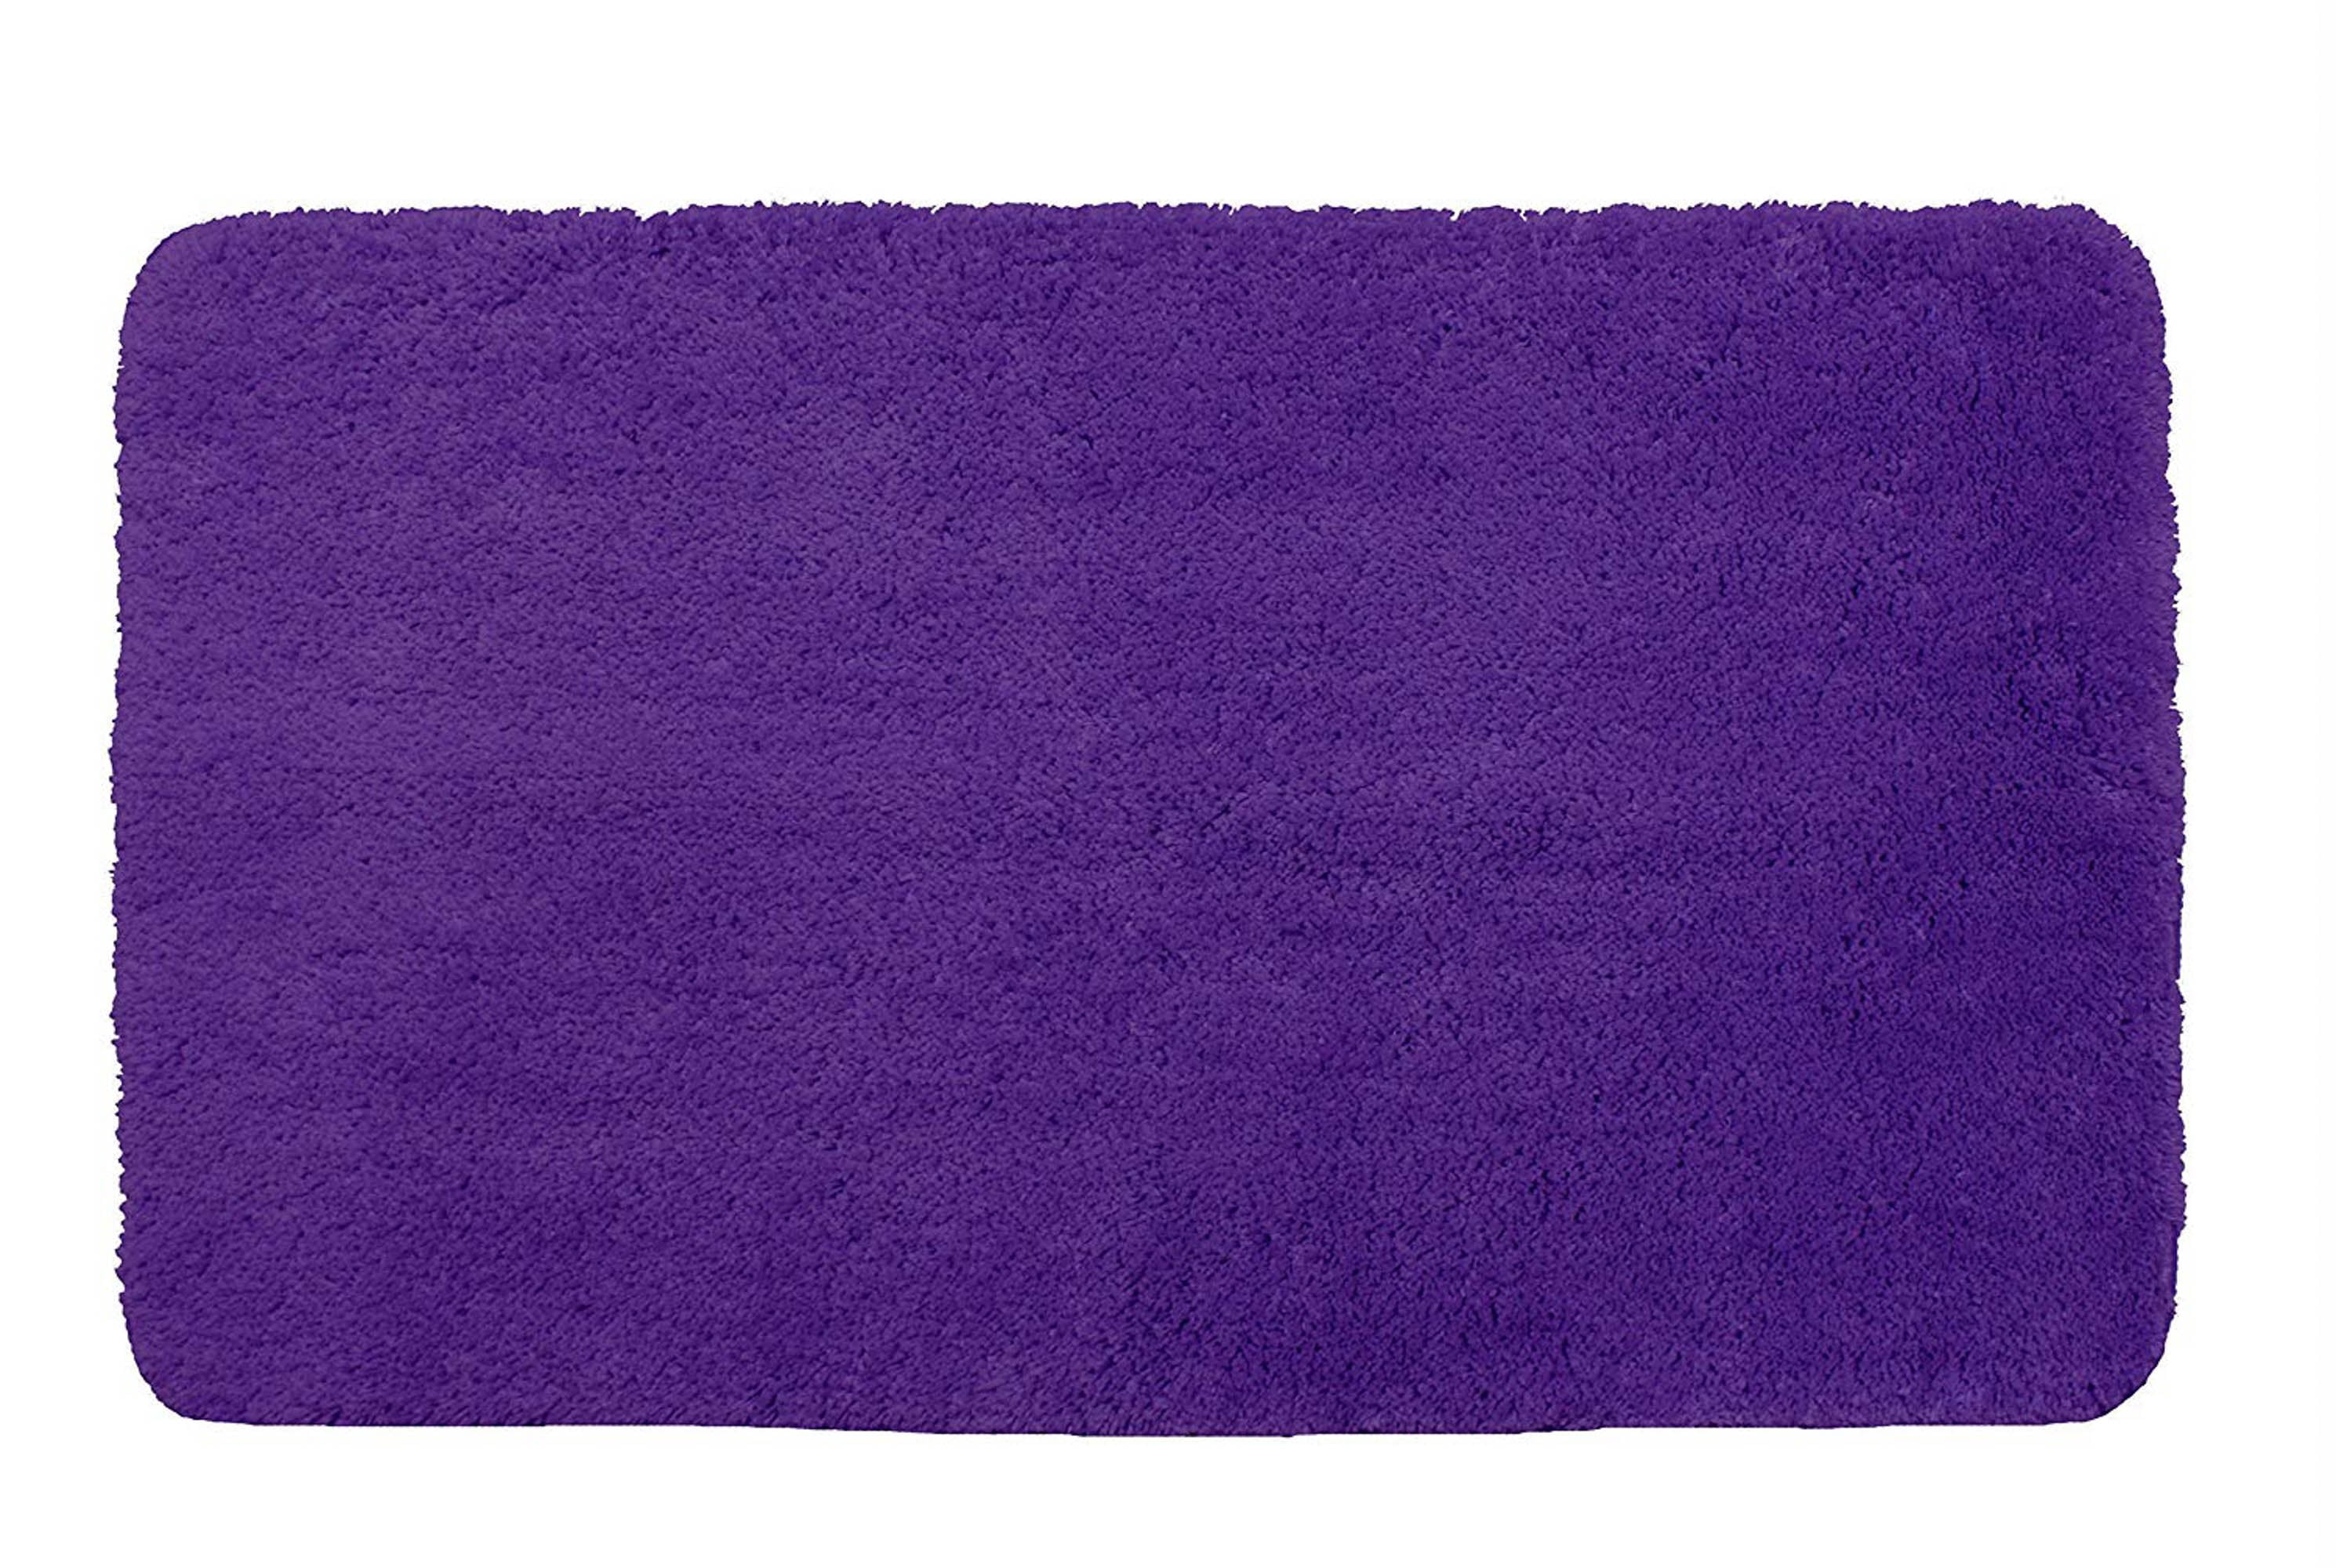 Picture of Design Imports 10481 24 x 40 in. Purple Bath Rug